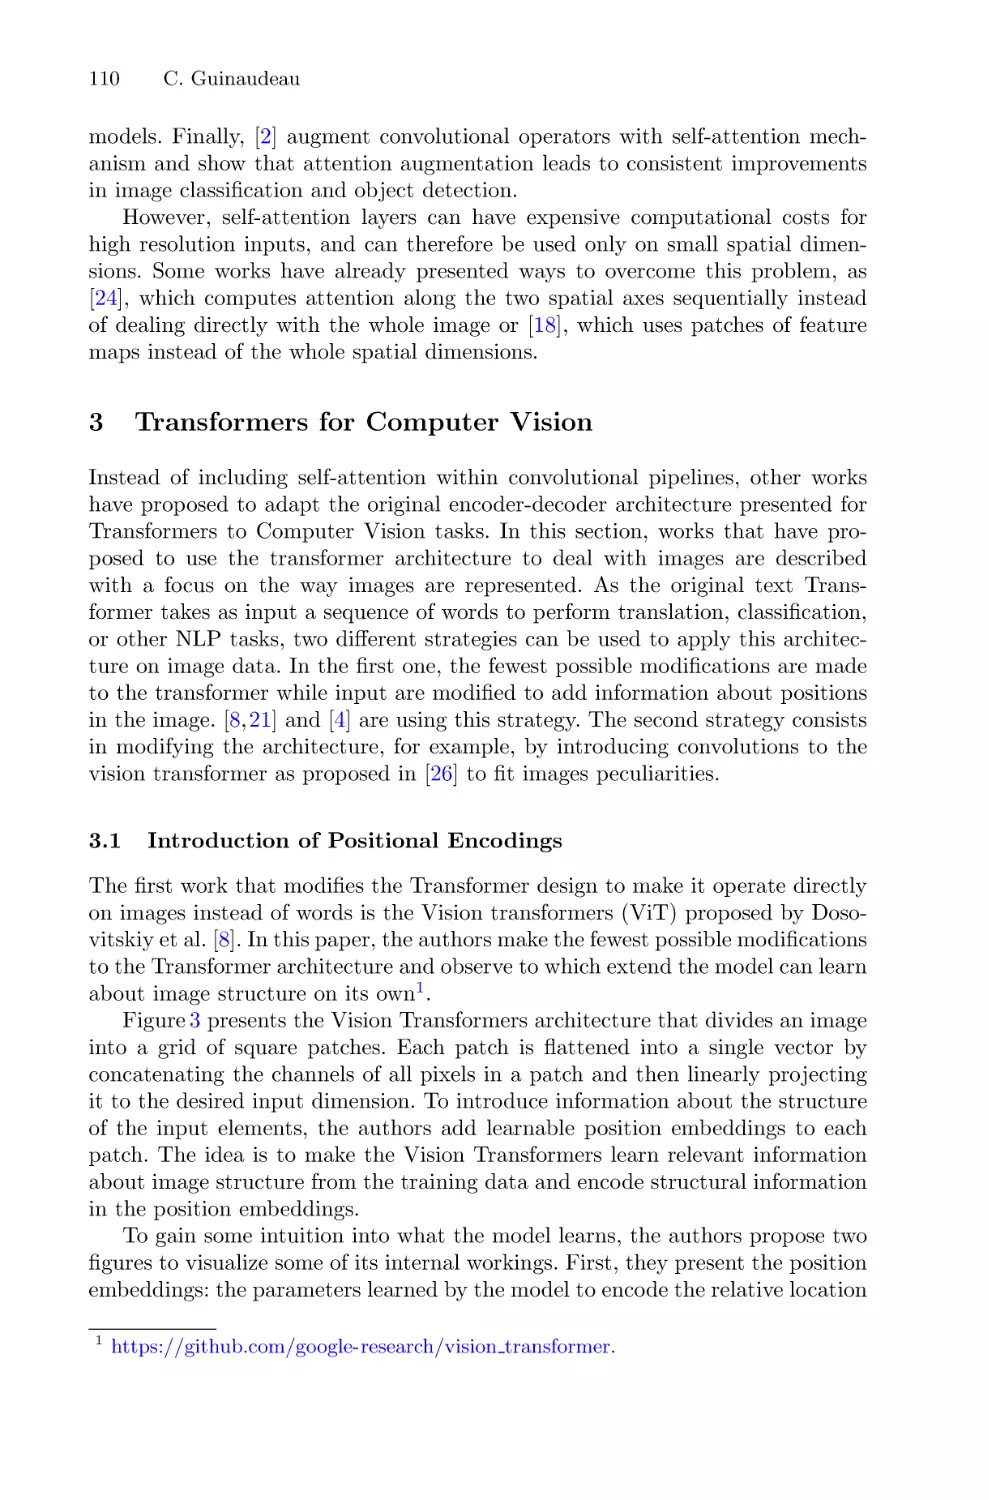 3 Transformers for Computer Vision
3.1 Introduction of Positional Encodings